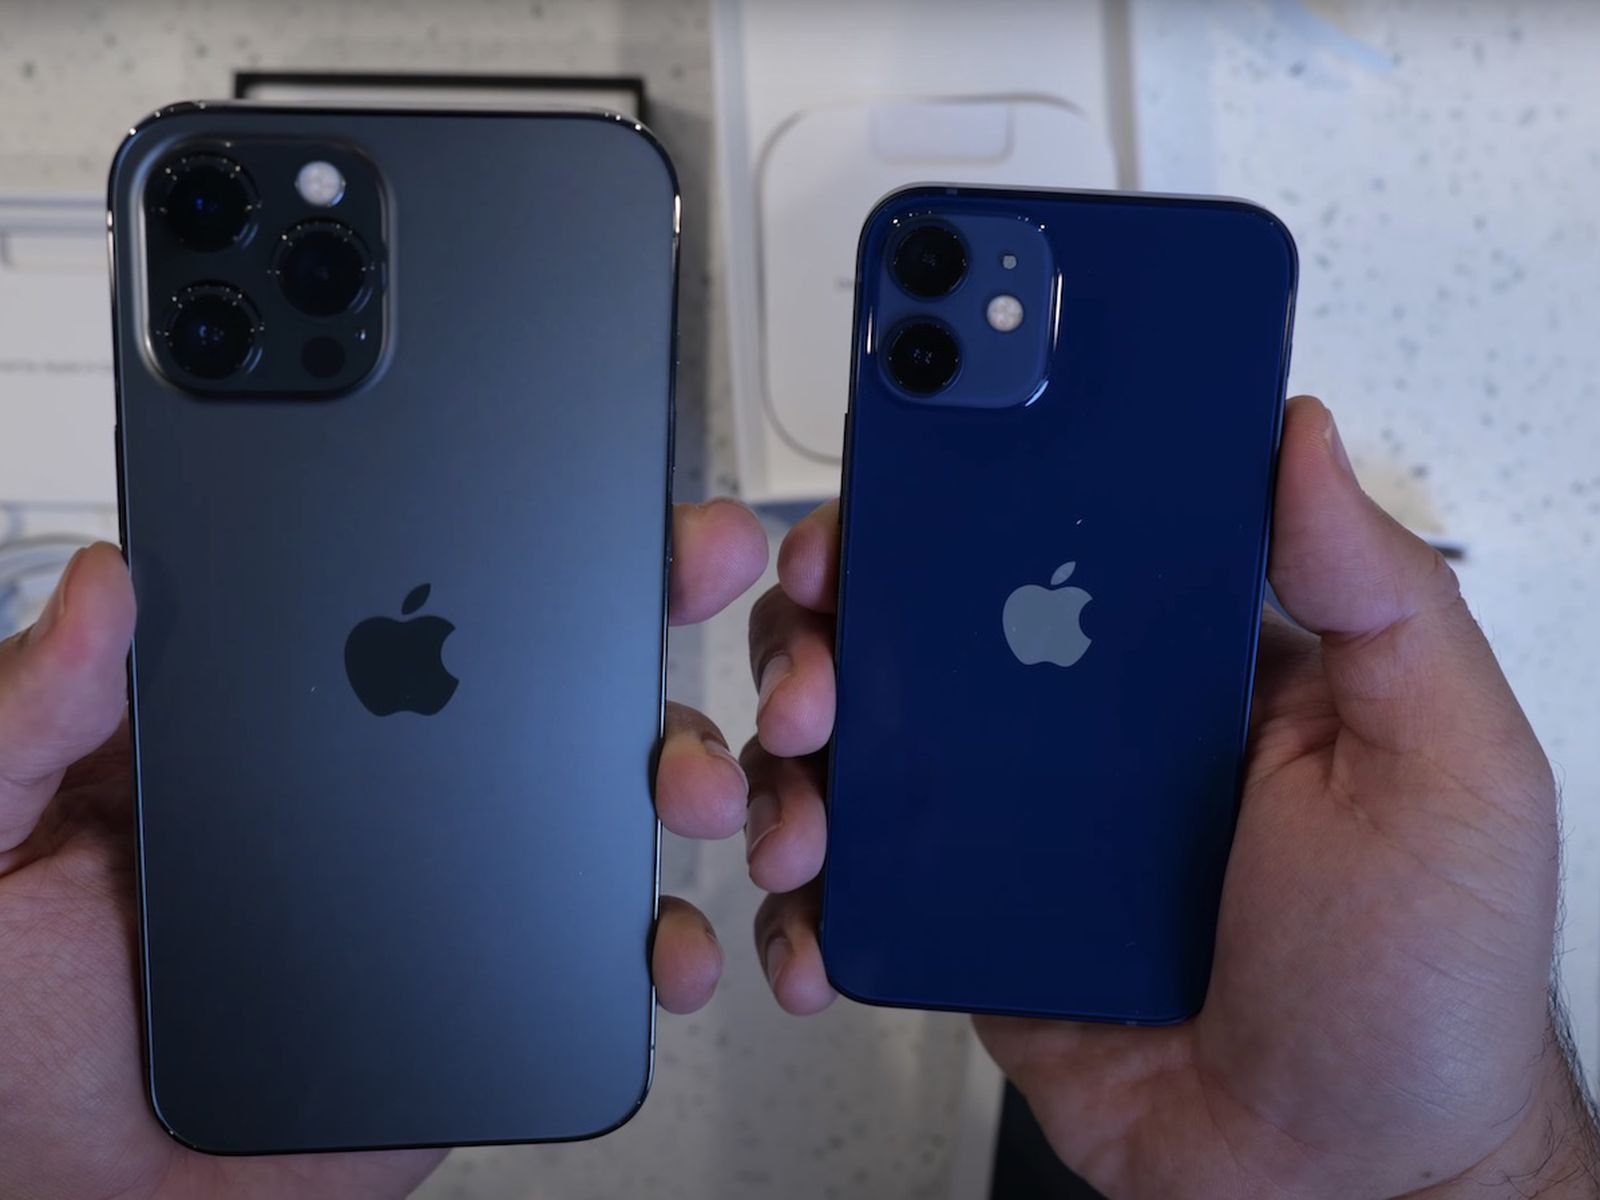 Watch: iPhone 12 Mini, iPhone 12 Pro Max, MagSafe Duo Charger, and